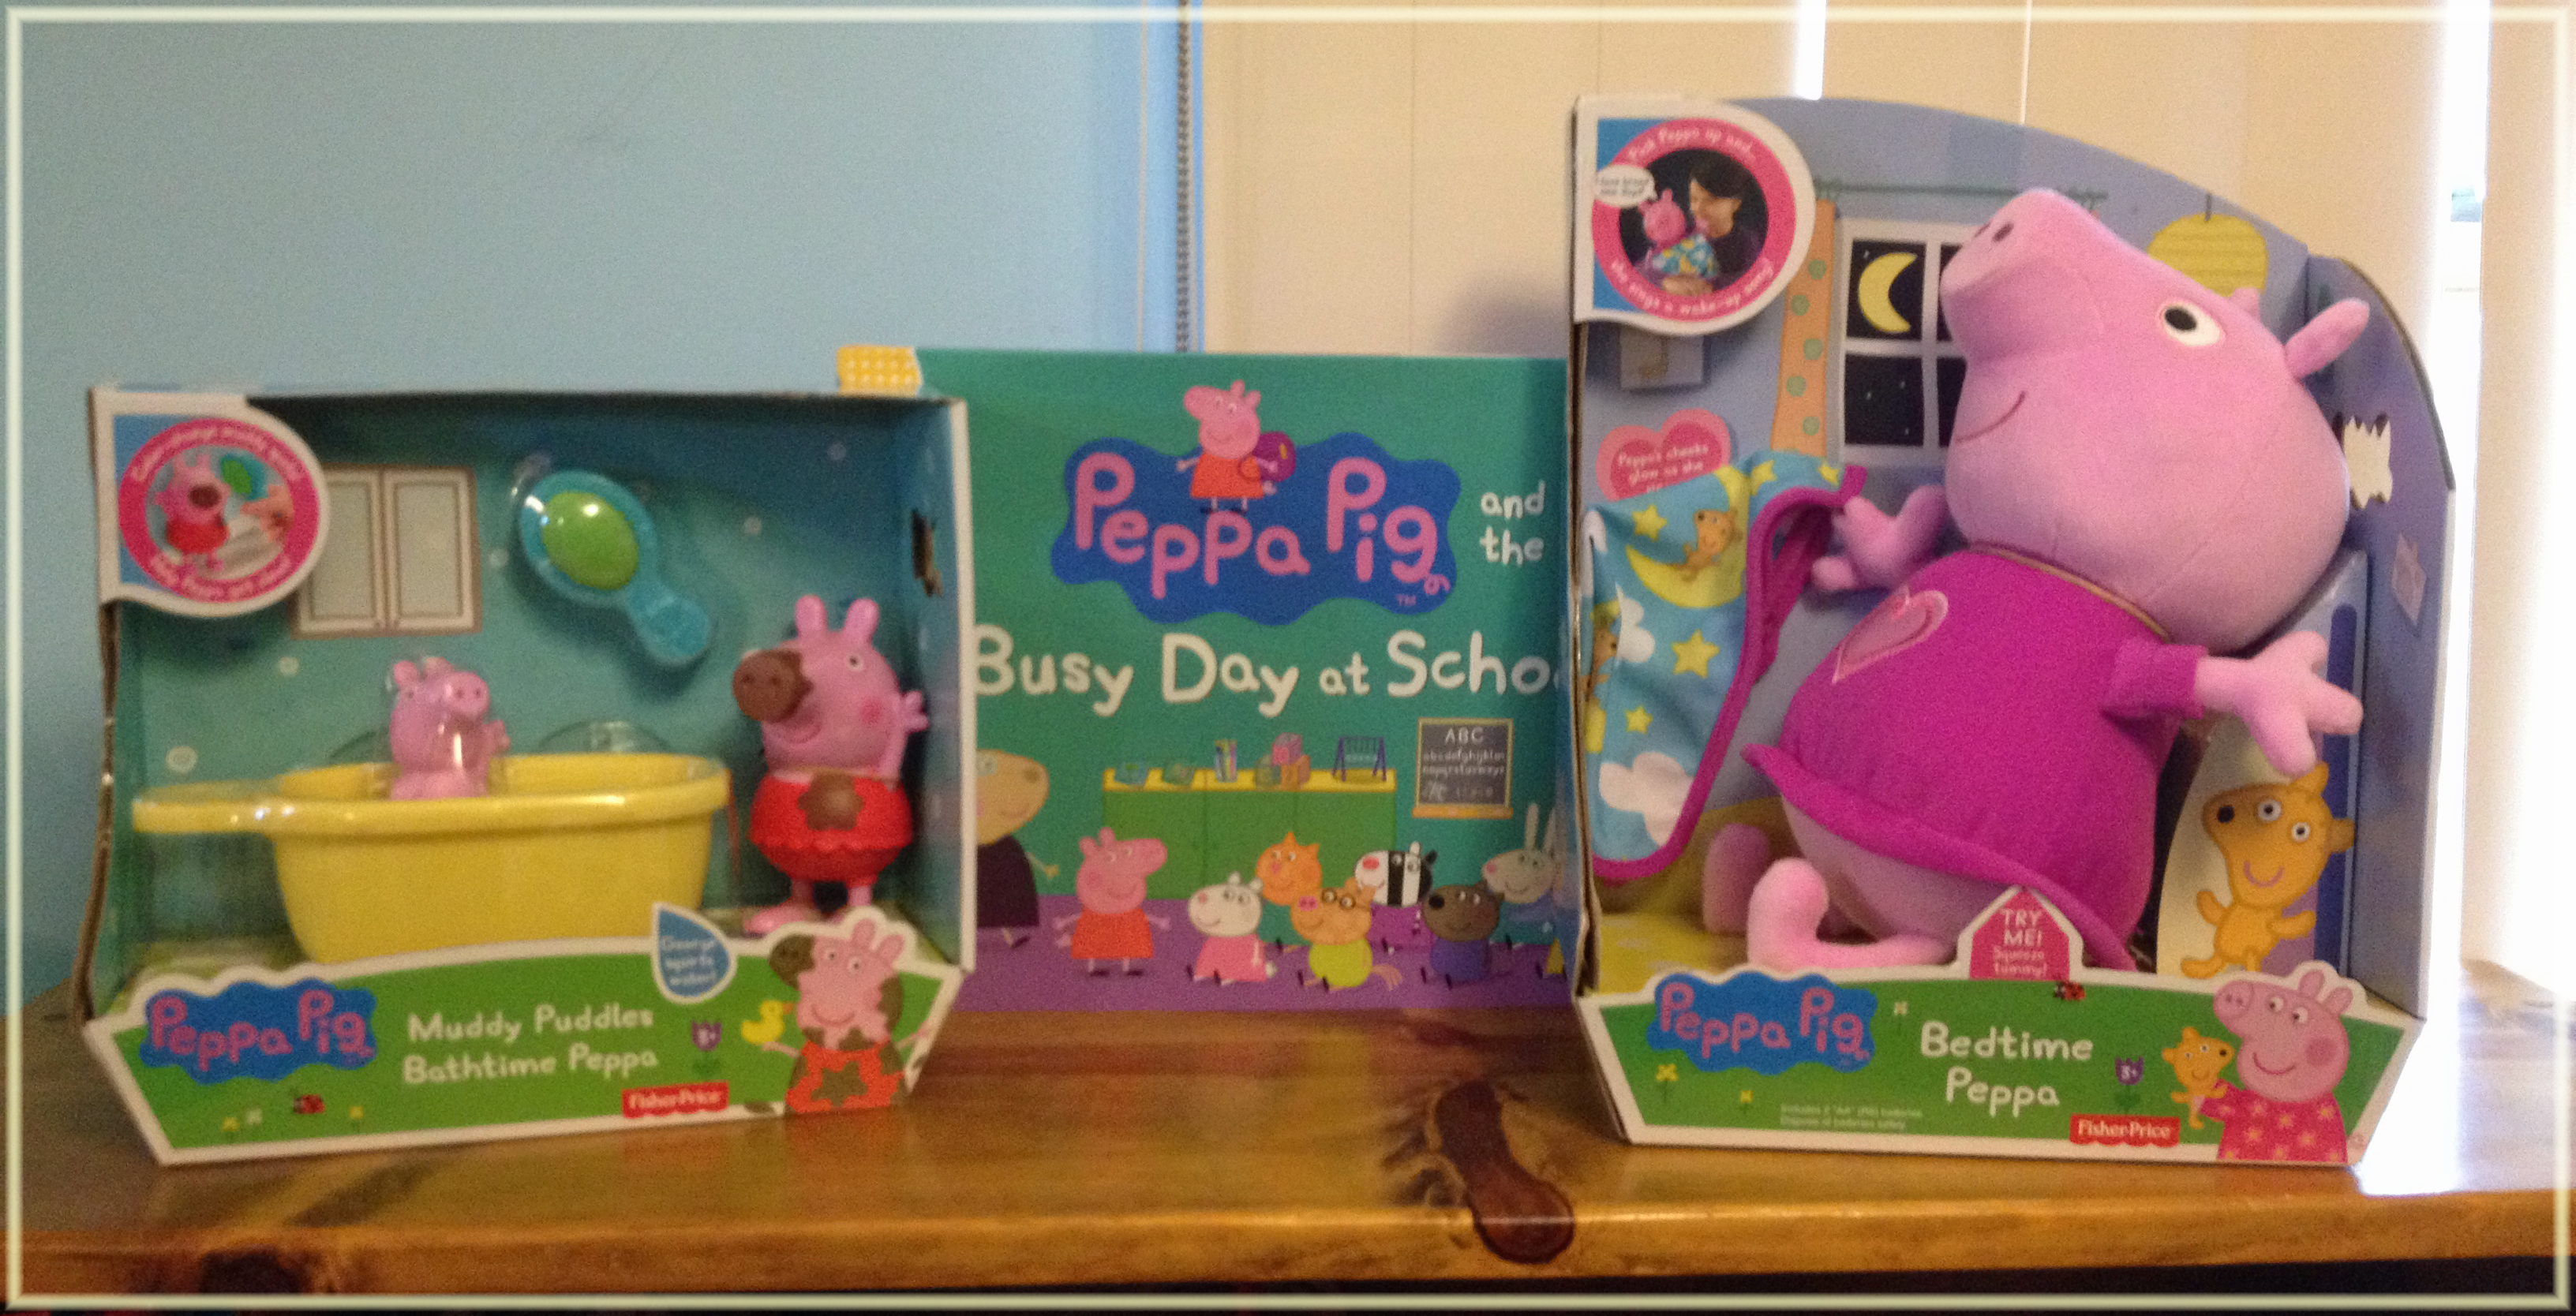 peppa the pig toys target